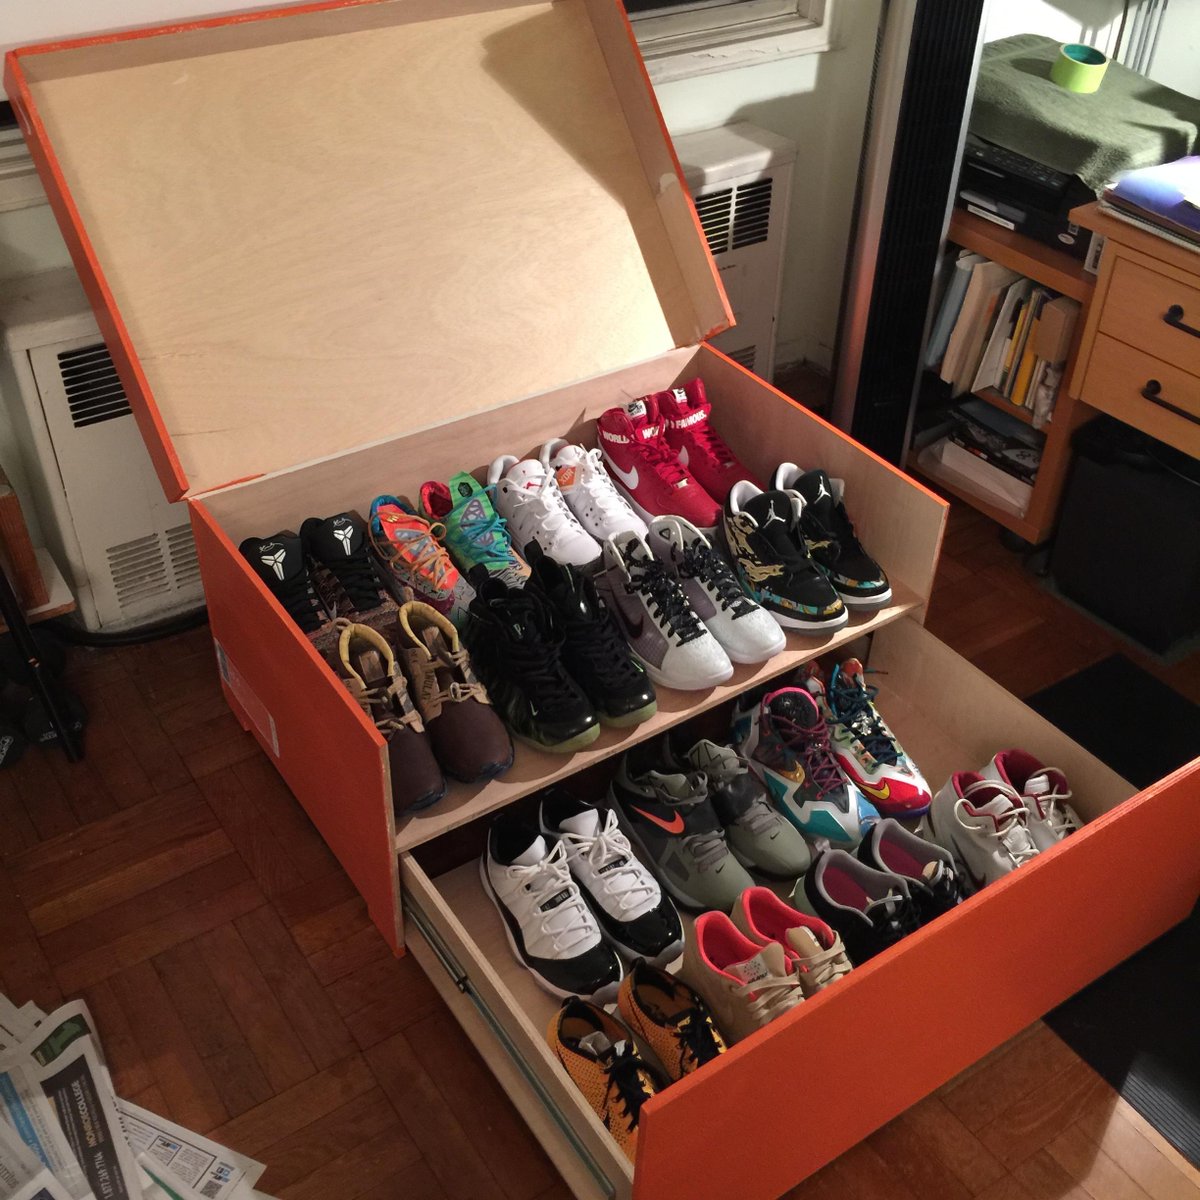 Complex Sneakers on Twitter: "You'll want store your sneakers in this GIGANTIC box: http://t.co/GDOTYNtAia http://t.co/hTIu06zpTF" / Twitter